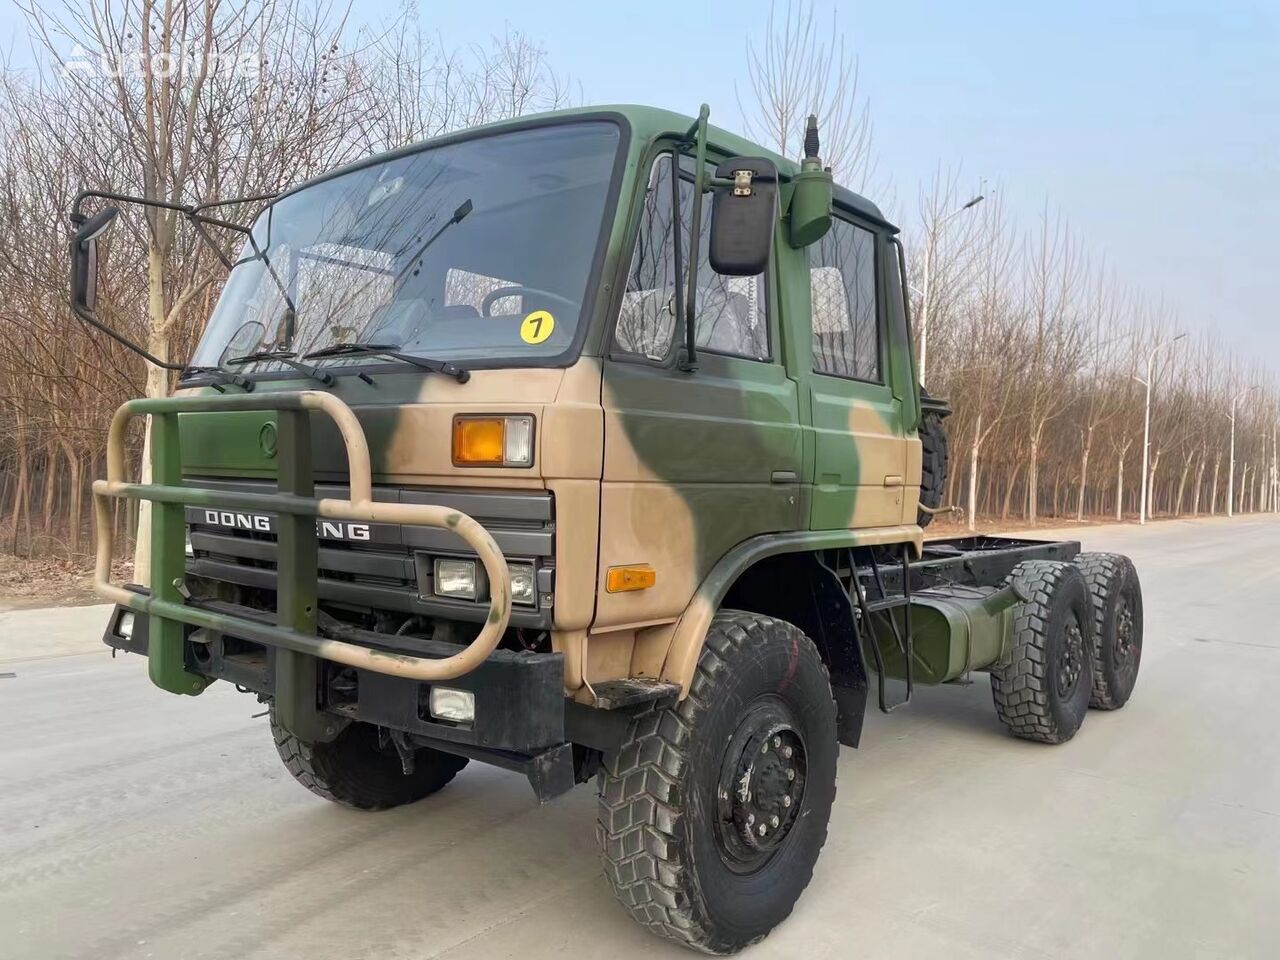 Dongfeng DONGFENG 246 Military Truck off road 6x6 truck Militär LKW